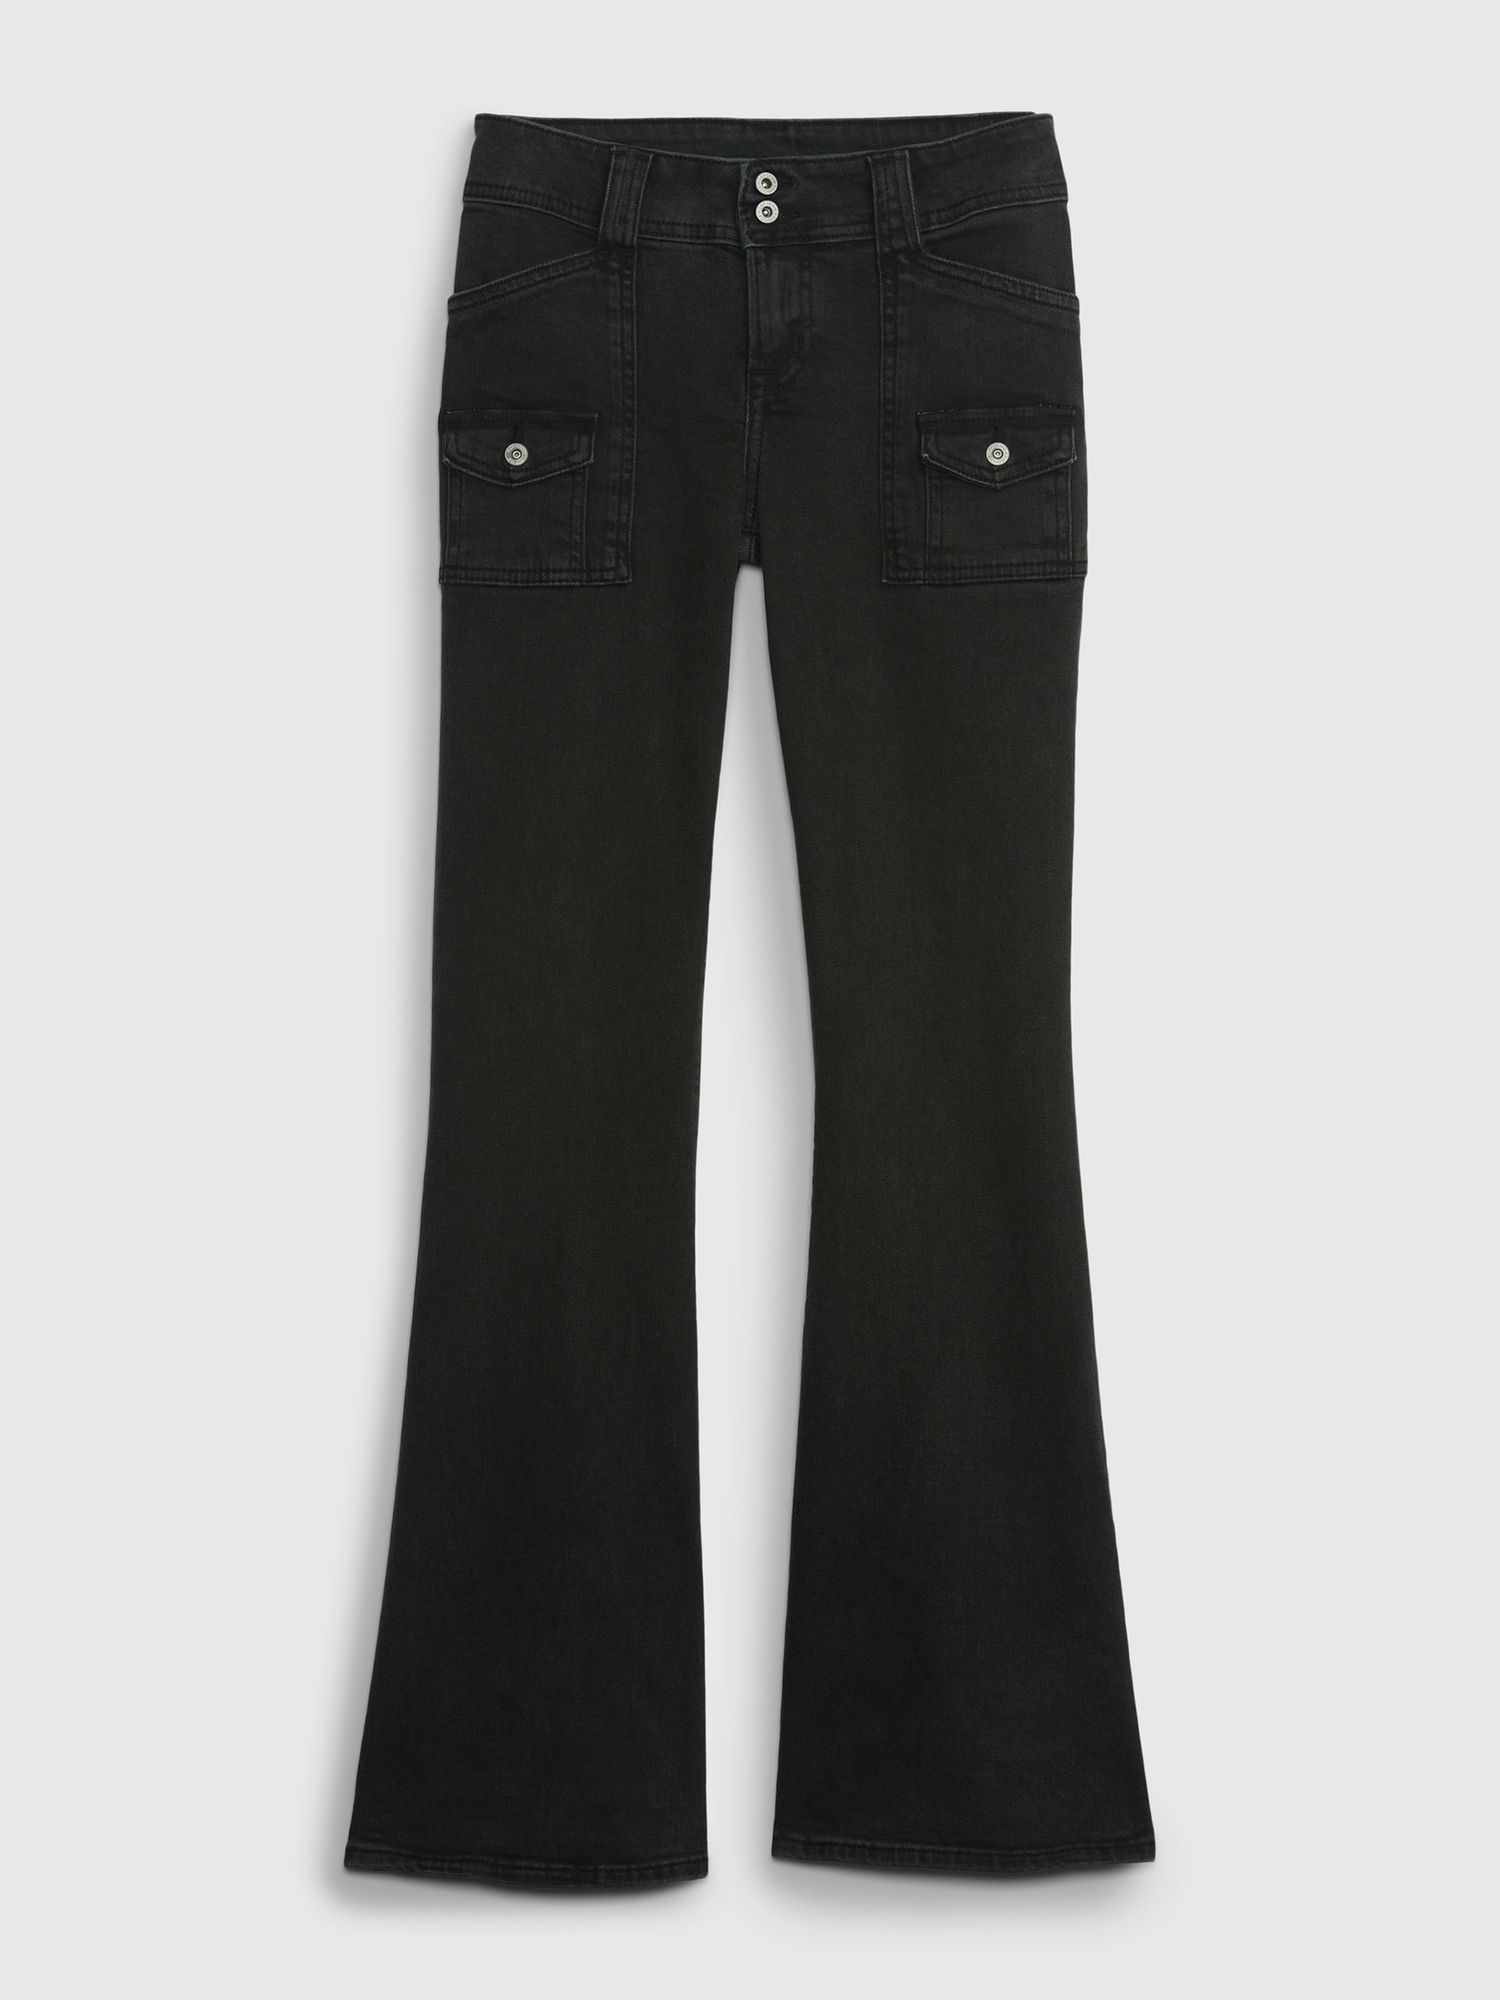 Buy Gap Low Rise Flare Jeans from the Gap online shop